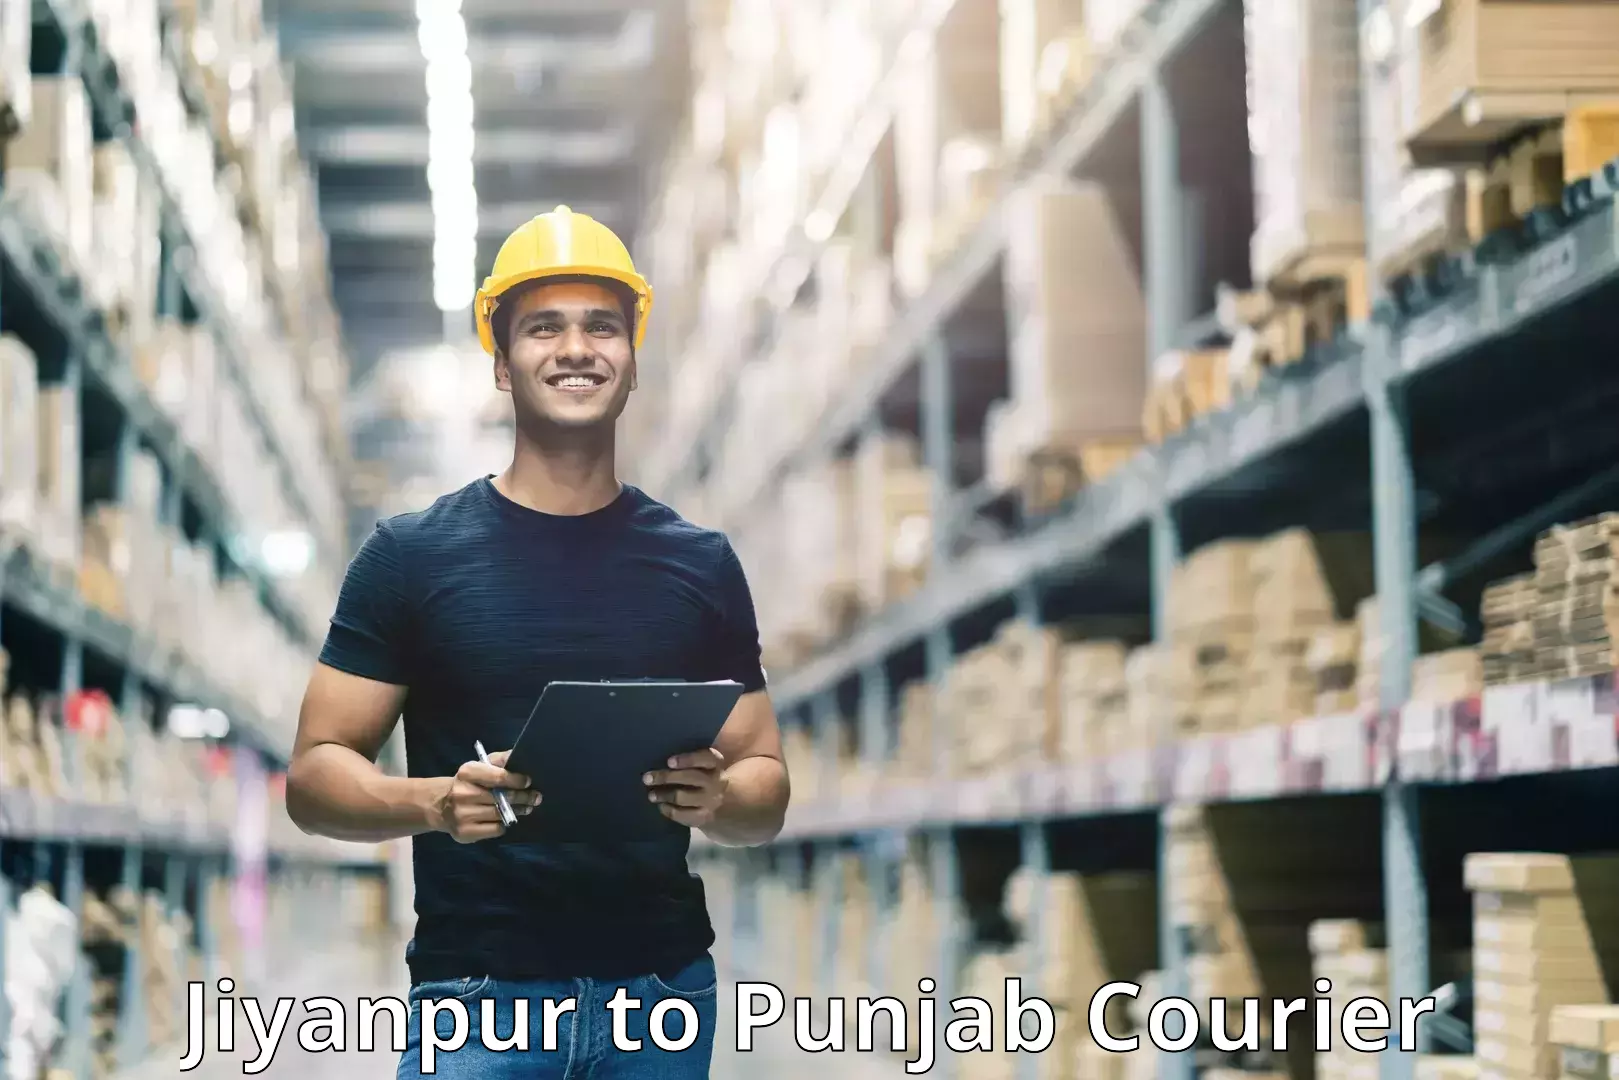 State-of-the-art courier technology Jiyanpur to Machhiwara